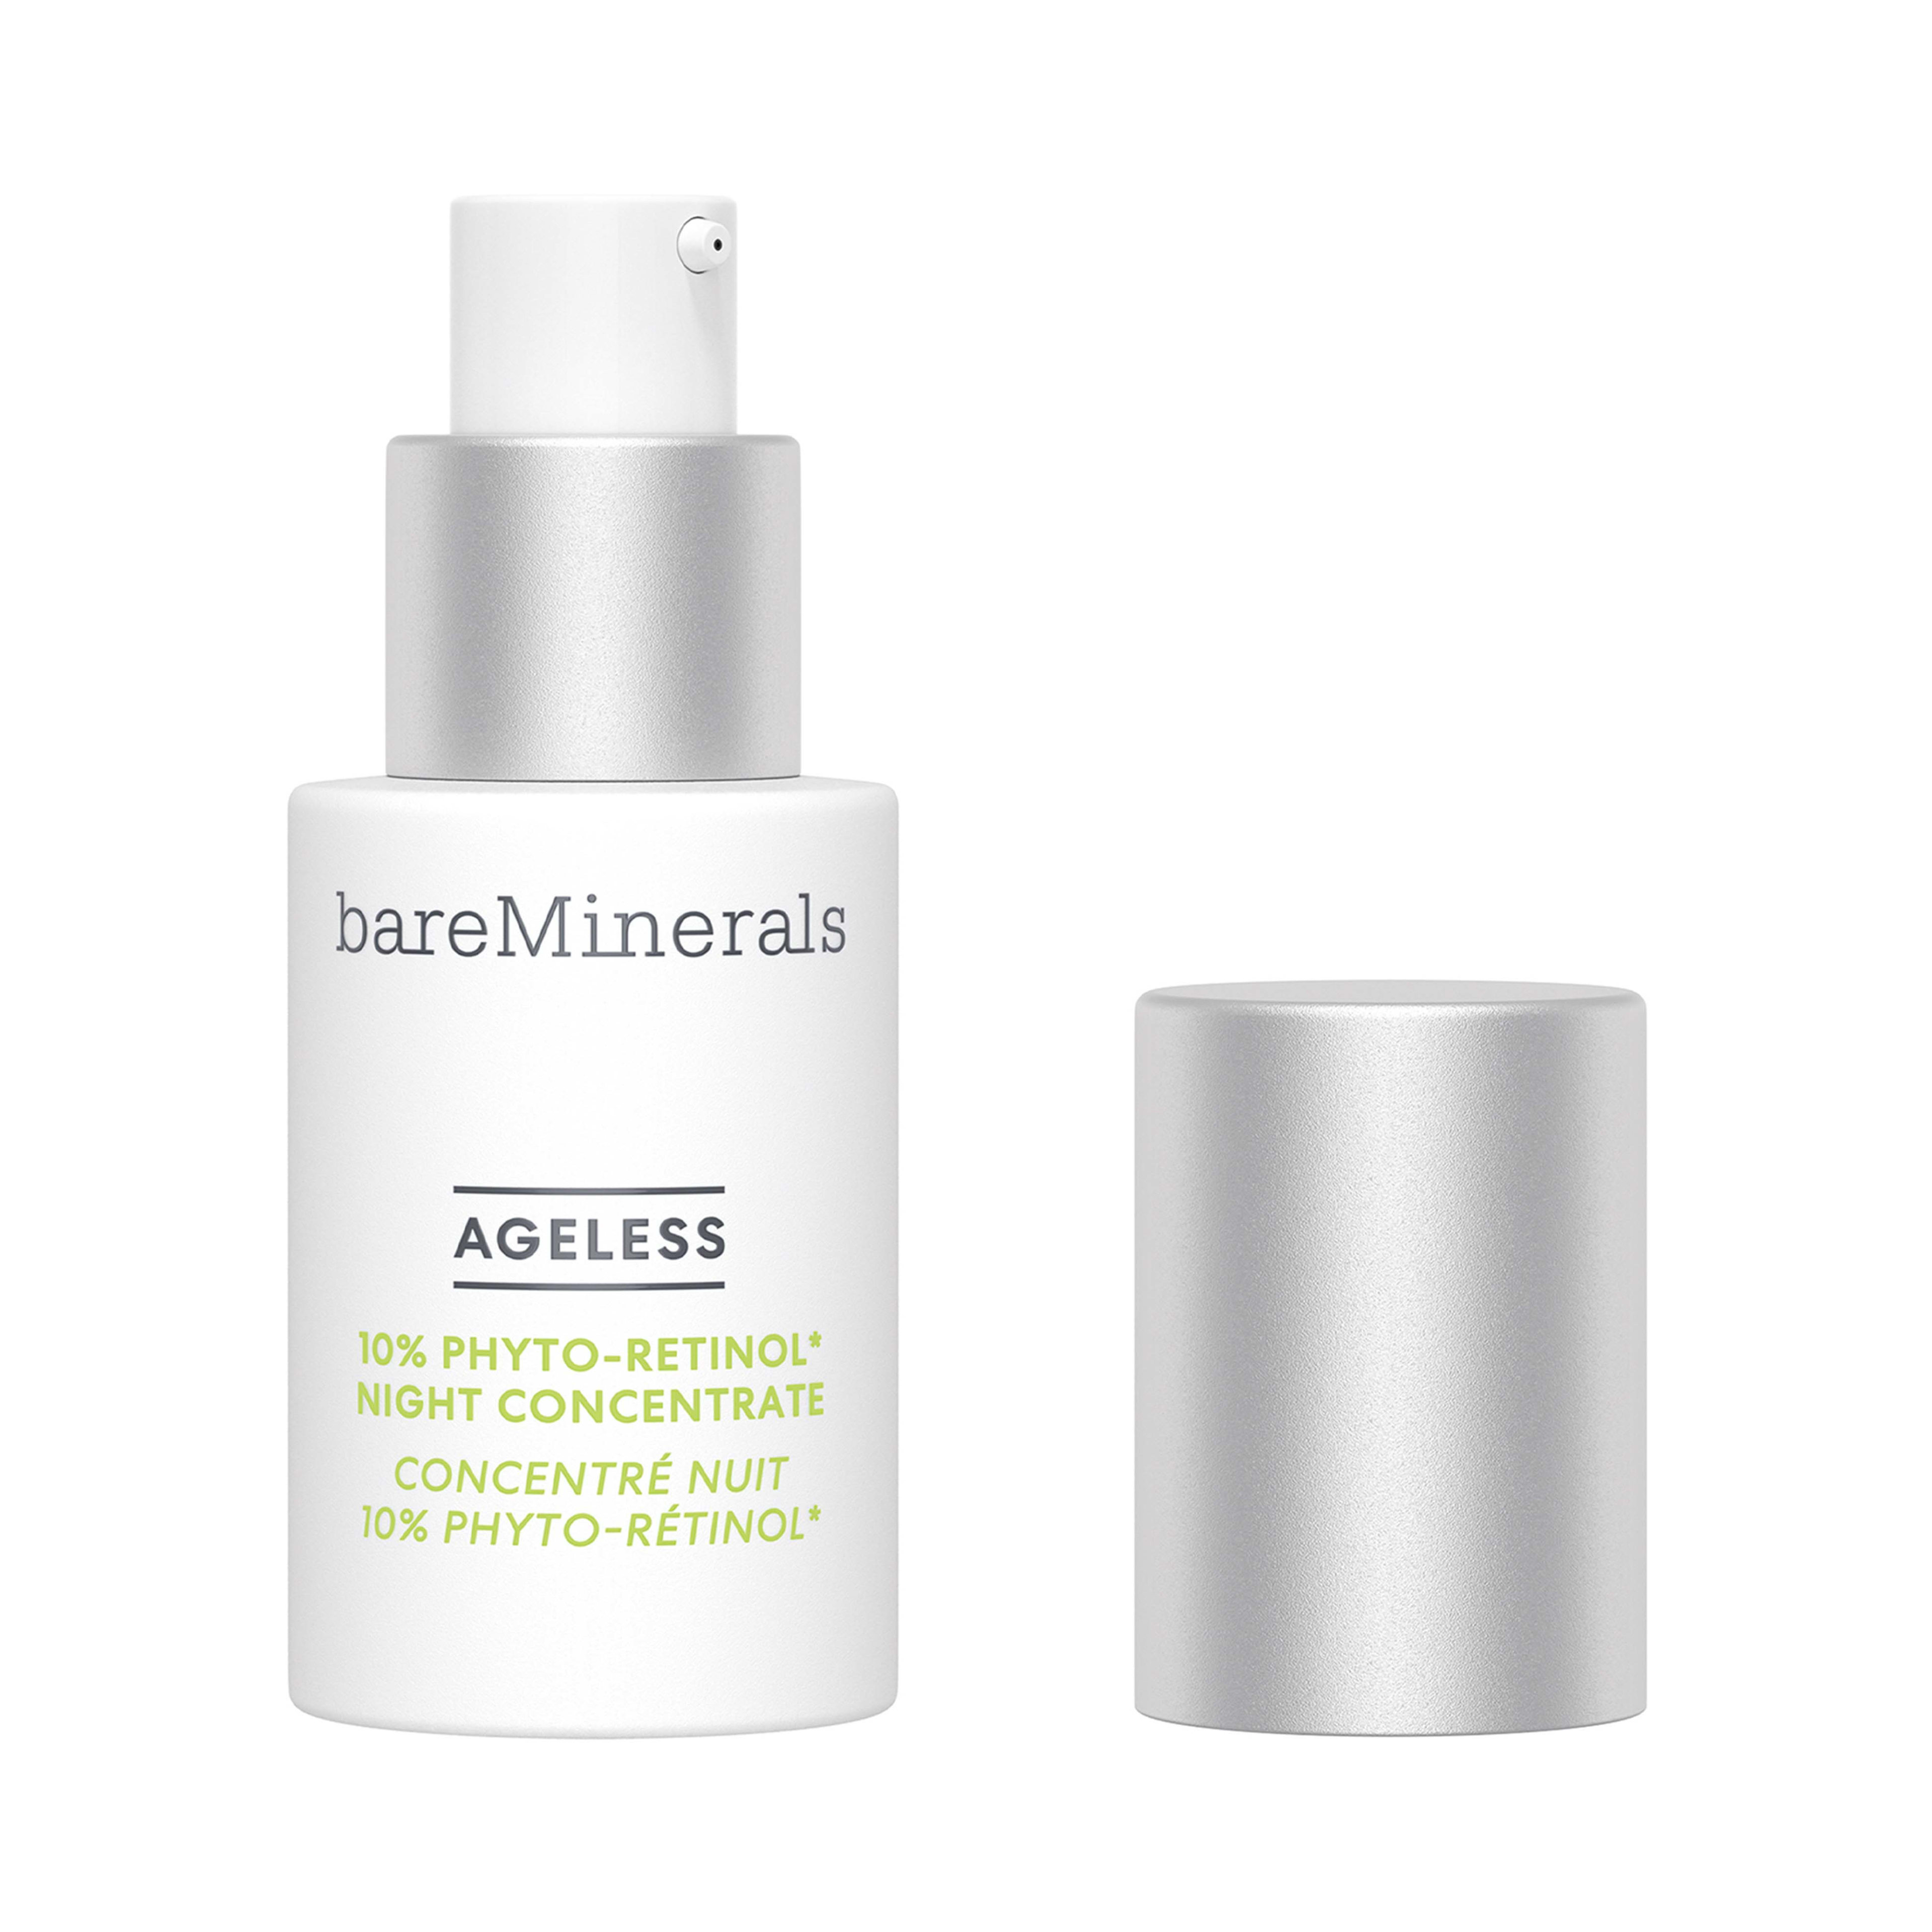 Ageless Phyto-Retinol Night Concentrate Beauty To Go från bareMinerals